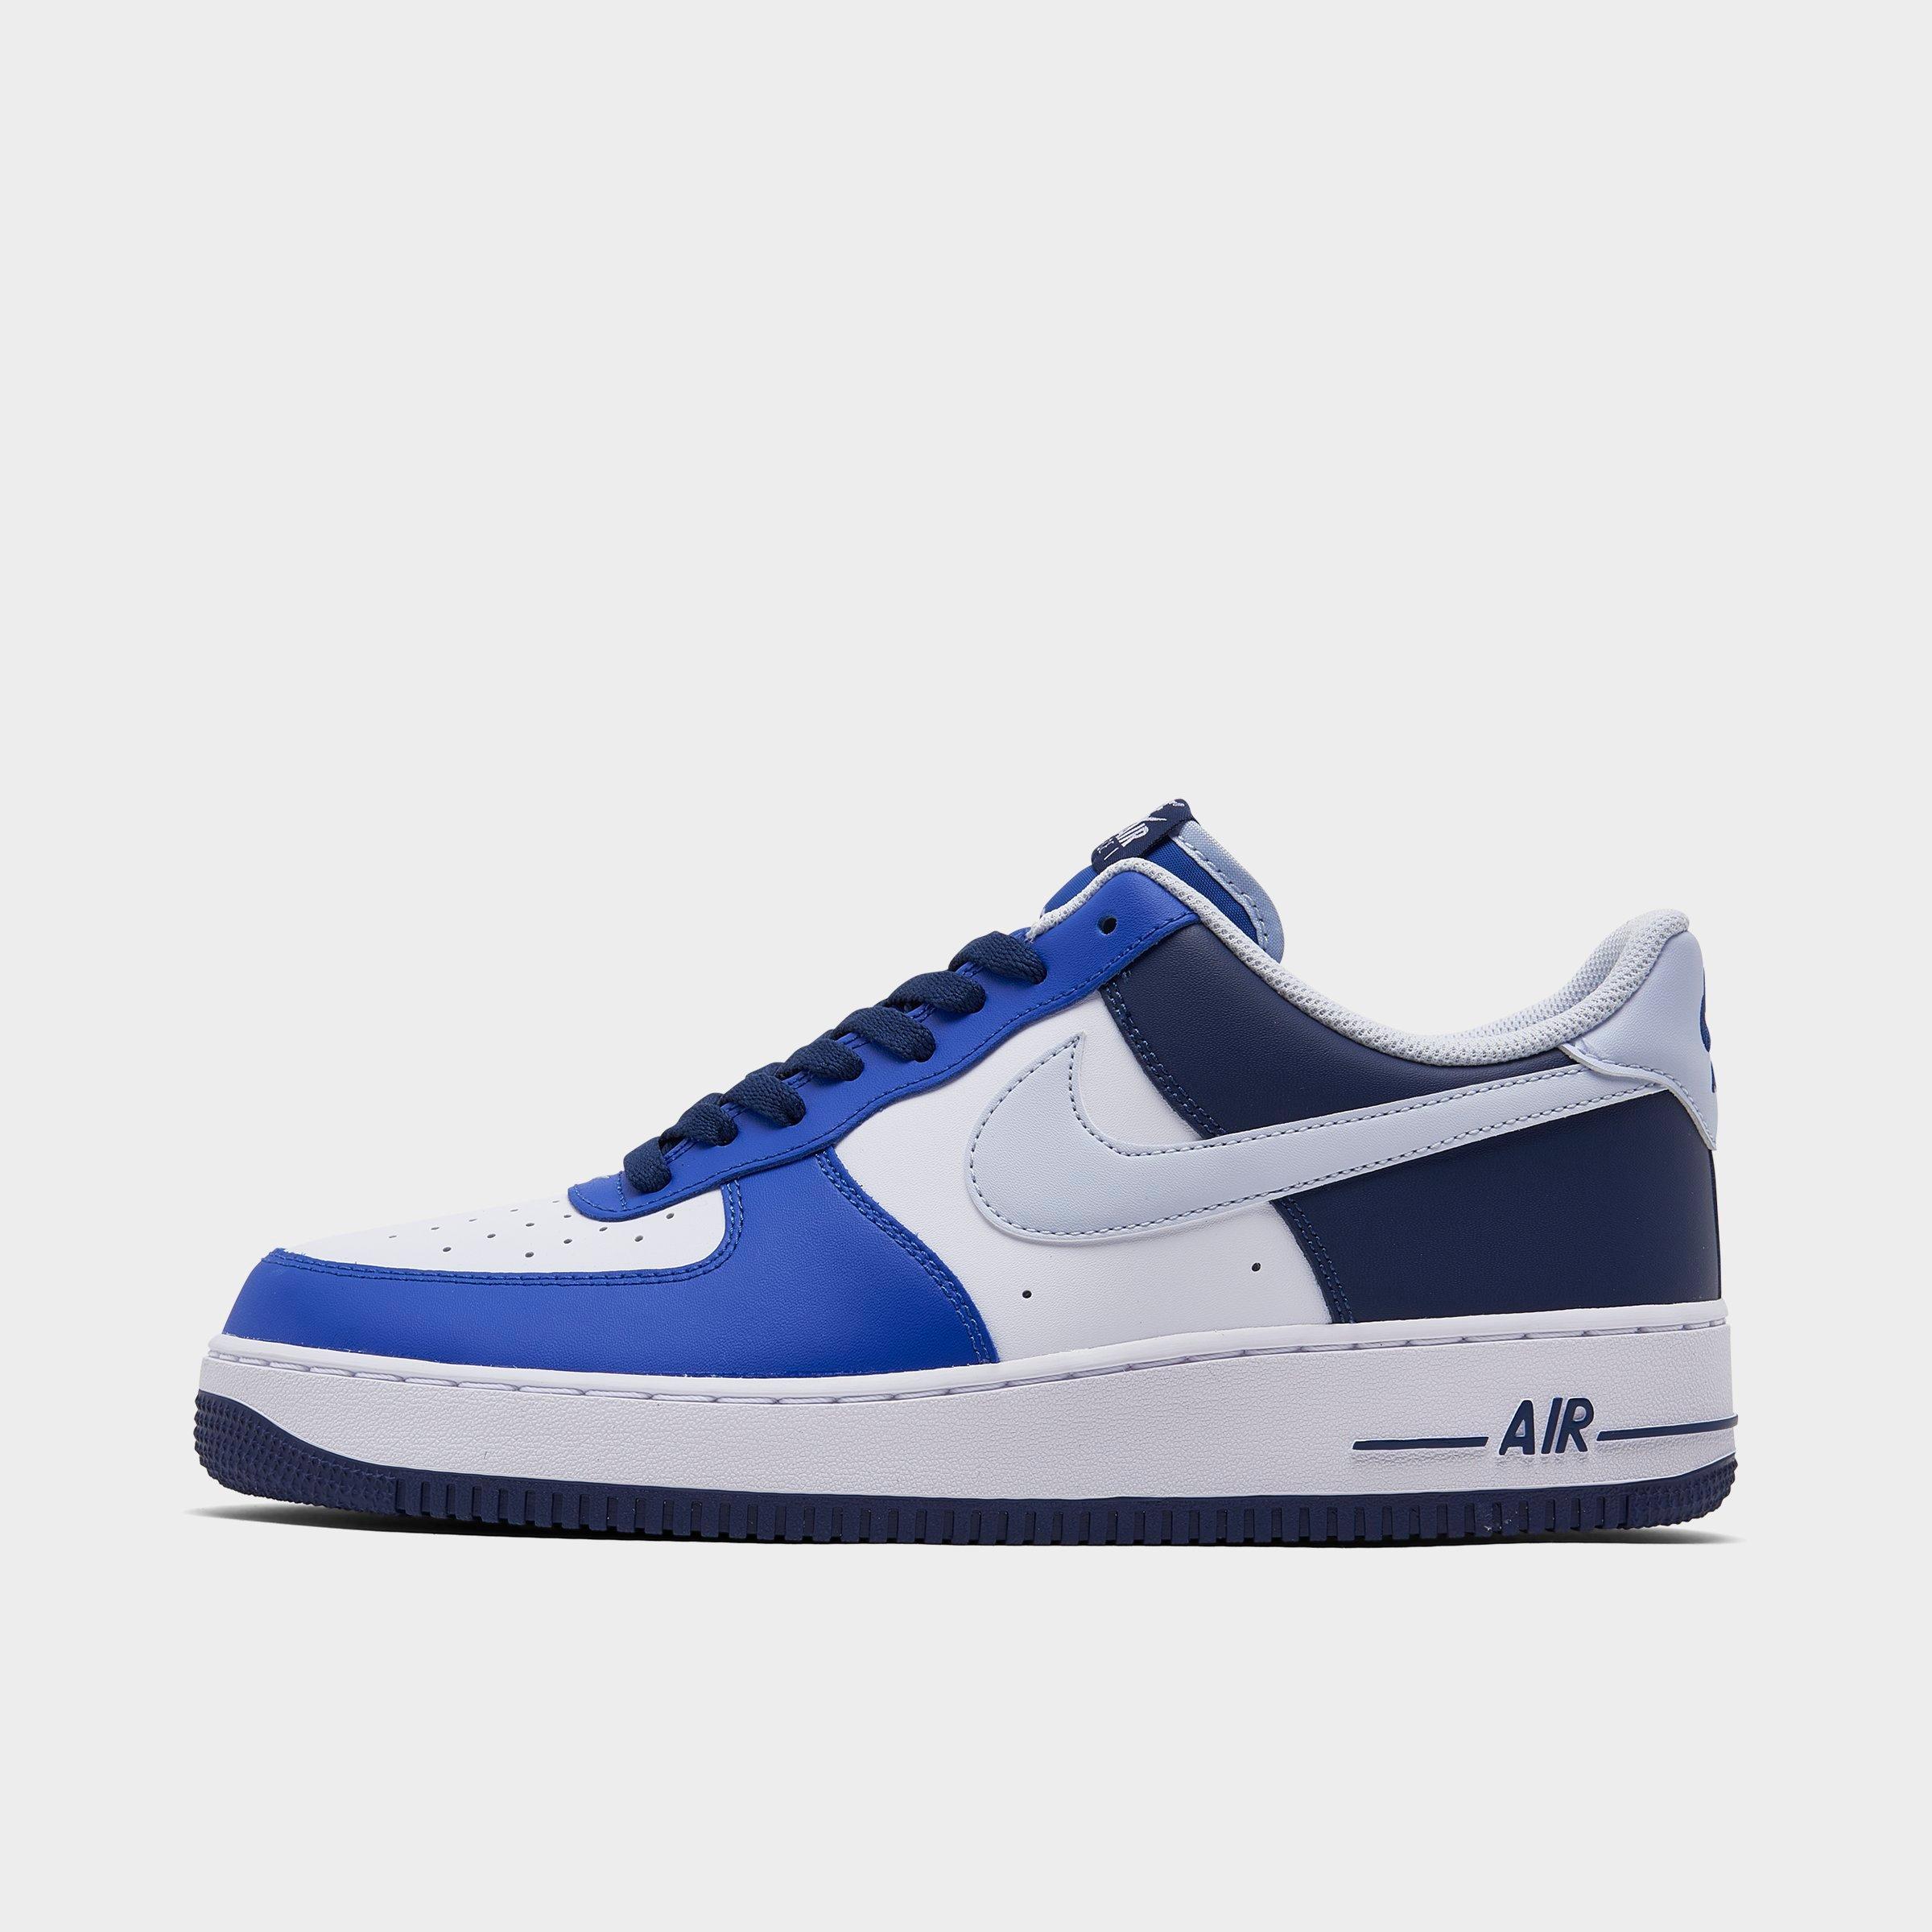 Nike Air force 1 lv8 utility price check? I have searched online and i cant  find anyone Selling Them. : r/Nike